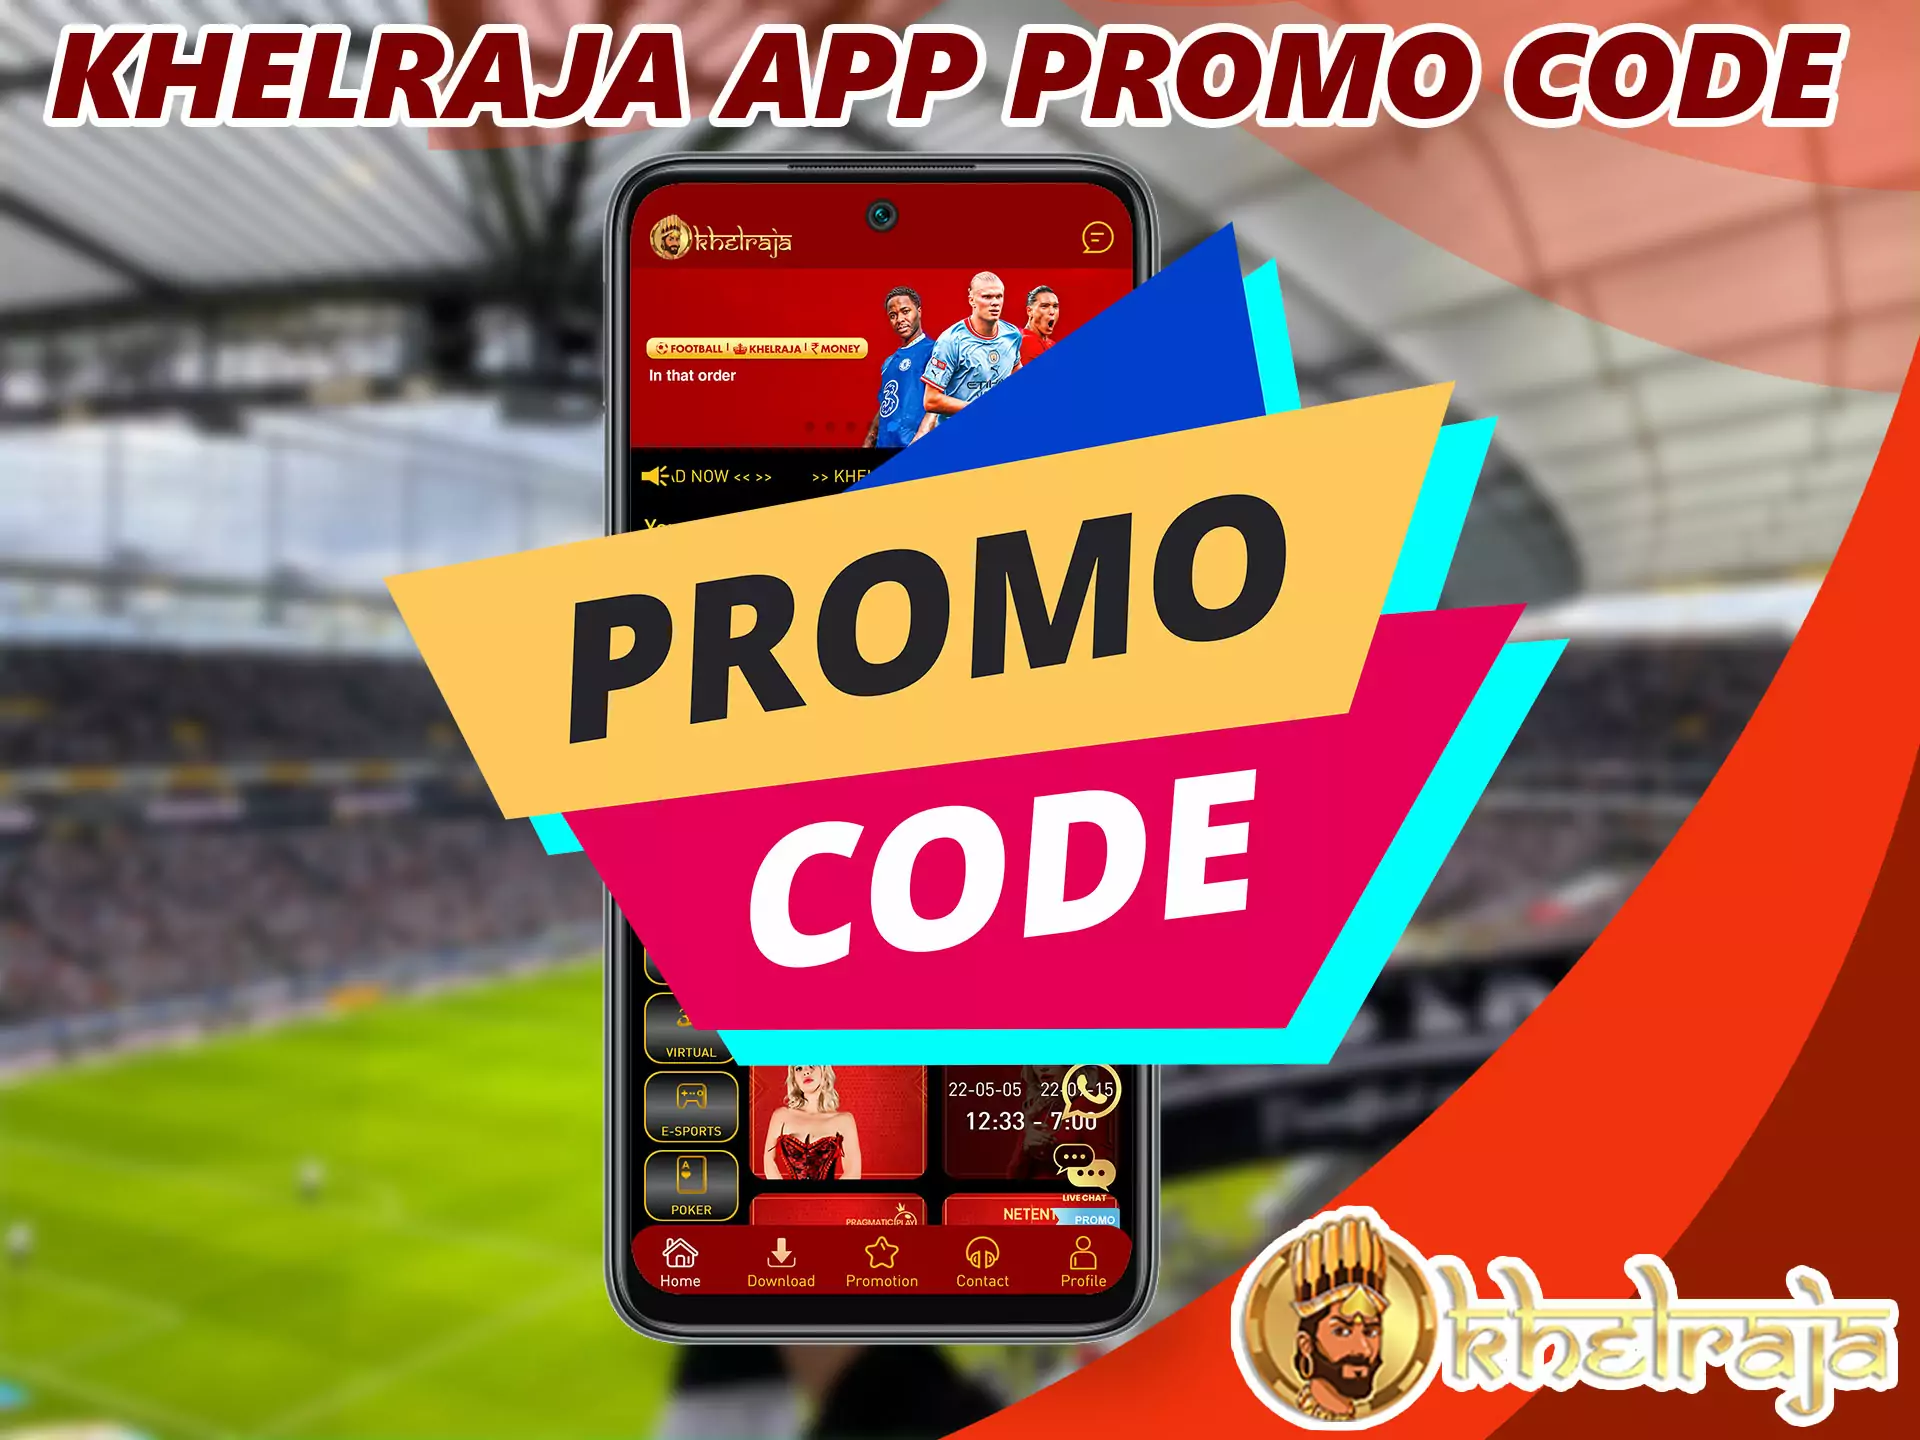 The bookmaker offers a lot of bonuses and promotions, they are available when registering an account, reload bonuses and other special offers are also waiting for you, just visit the "Promotions" section there you will find a lot of interesting things.